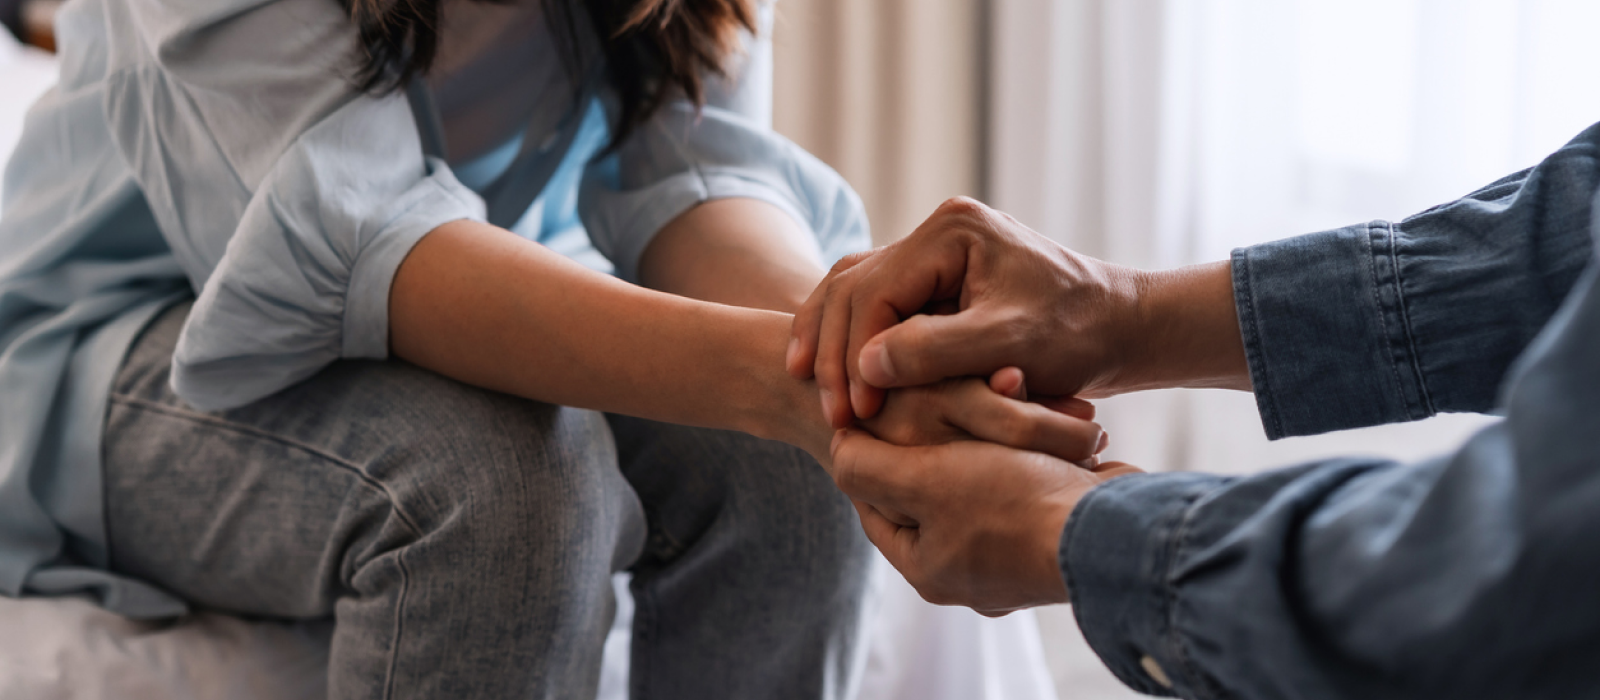 A young woman holds her partners hands to comfort him. He has experienced childhood emotional abuse and is having depressive symptoms as an adult.